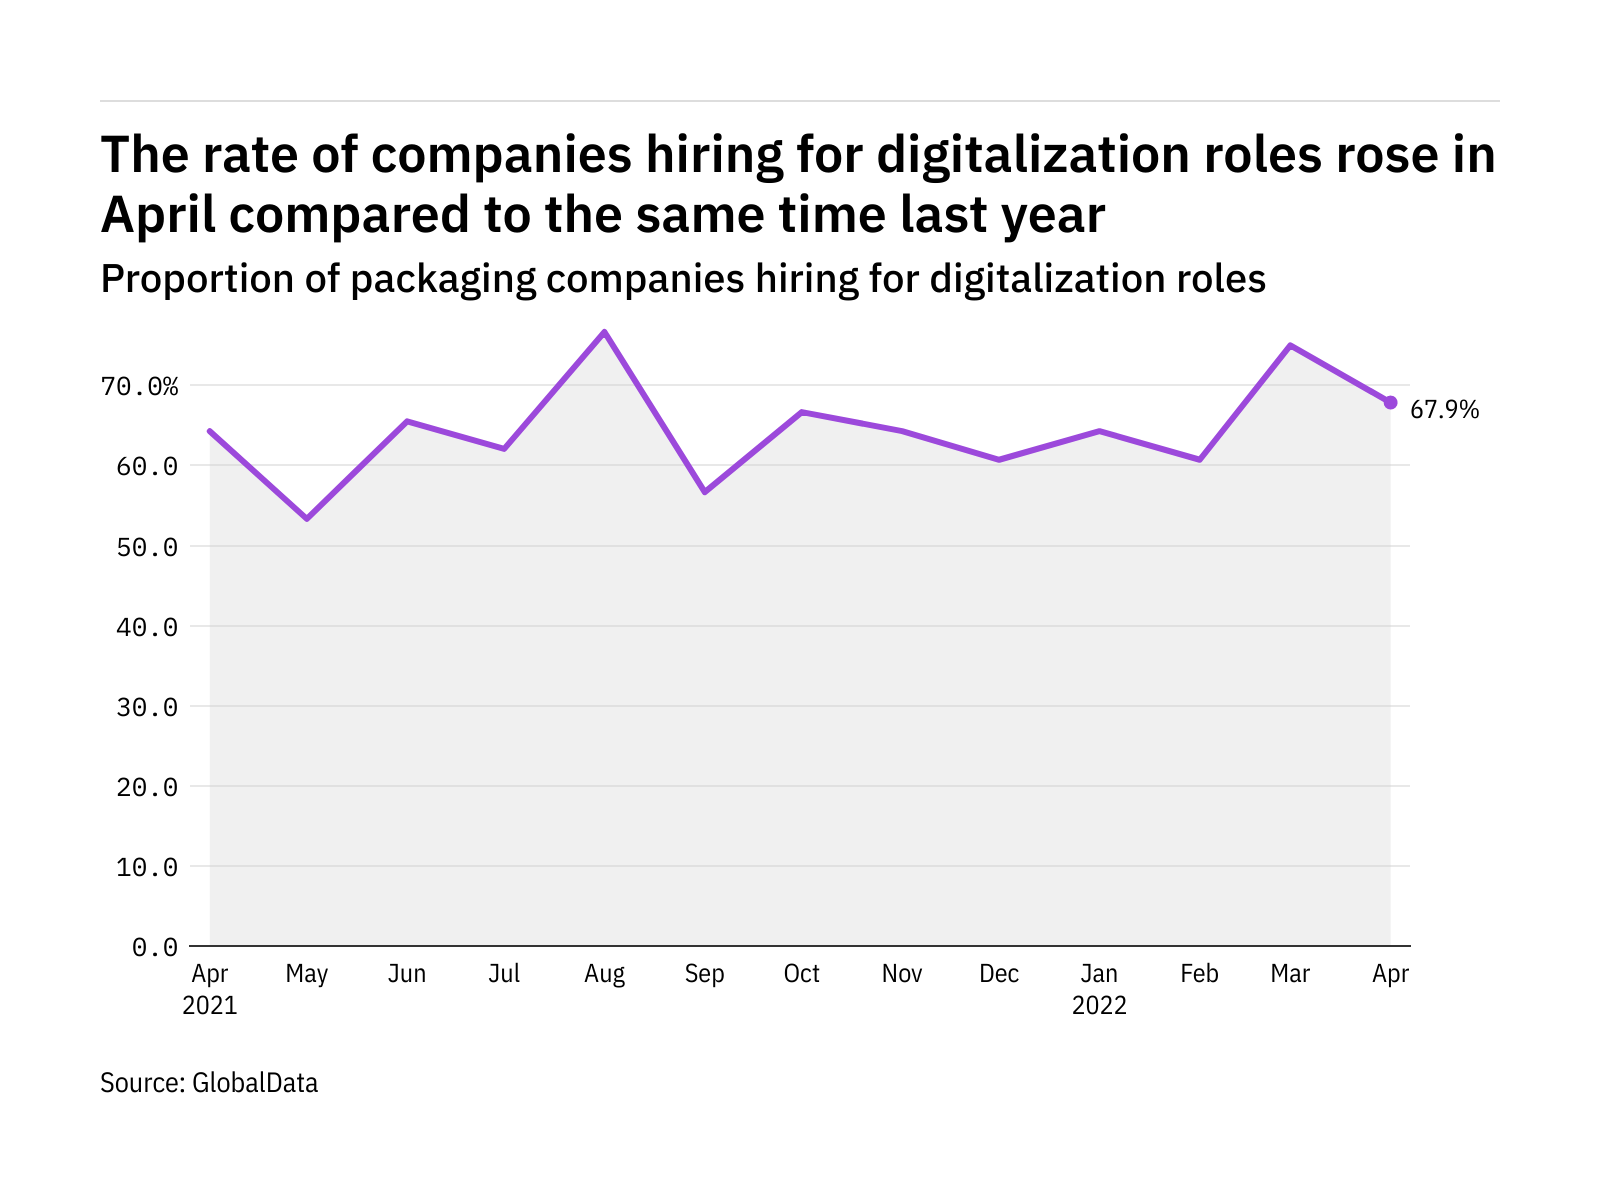 Digitalization hiring levels in the packaging industry rose in April 2022